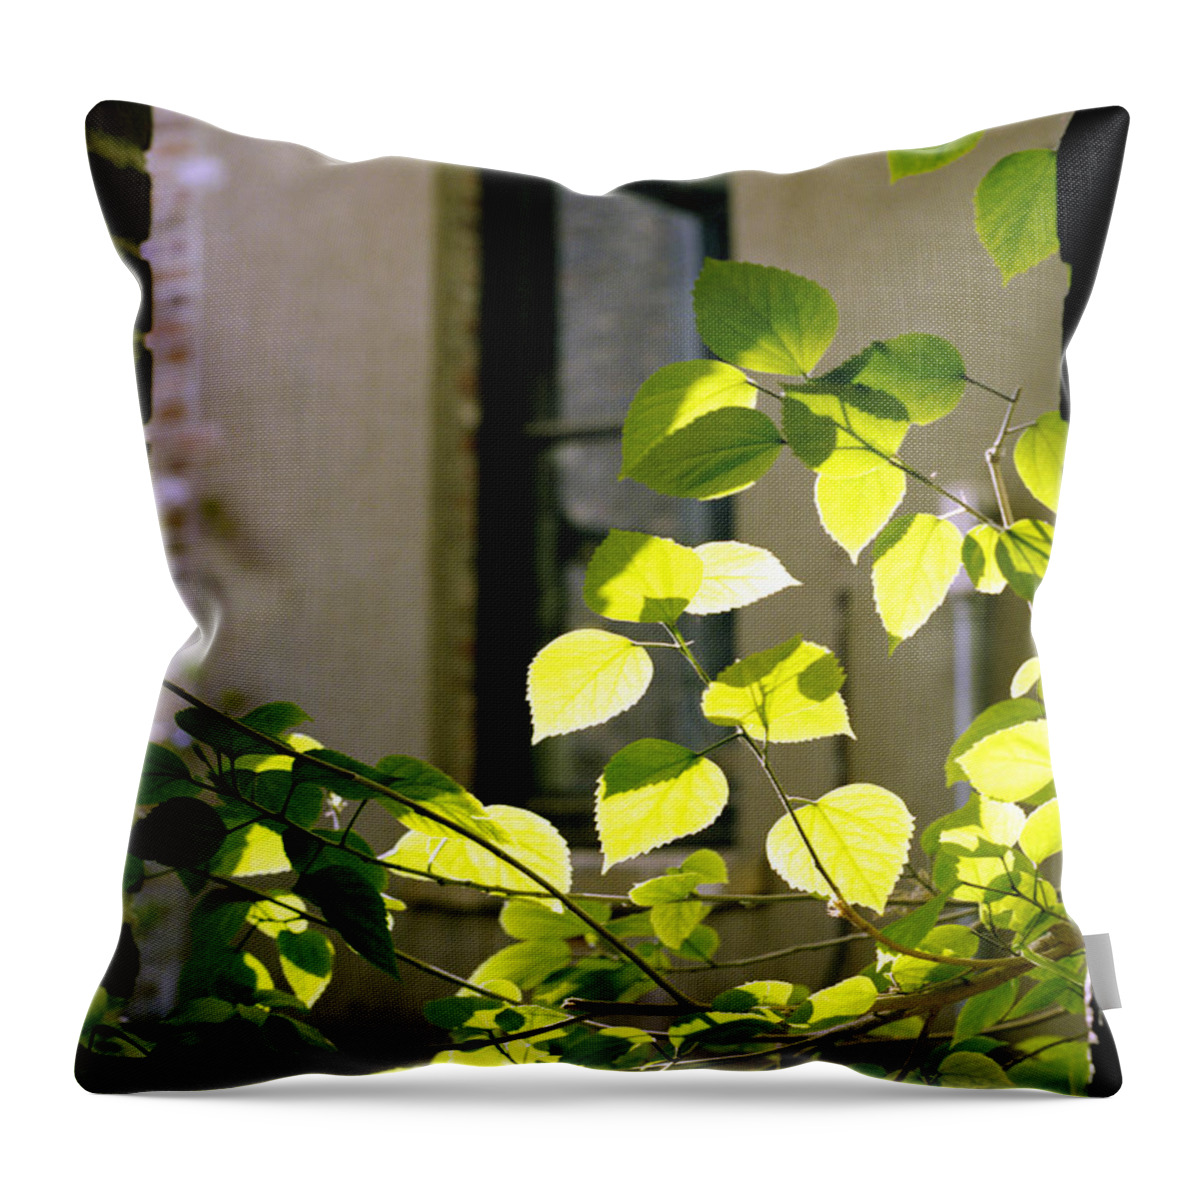 old Market Throw Pillow featuring the photograph Omaha Old Market Passageway by John Bowers